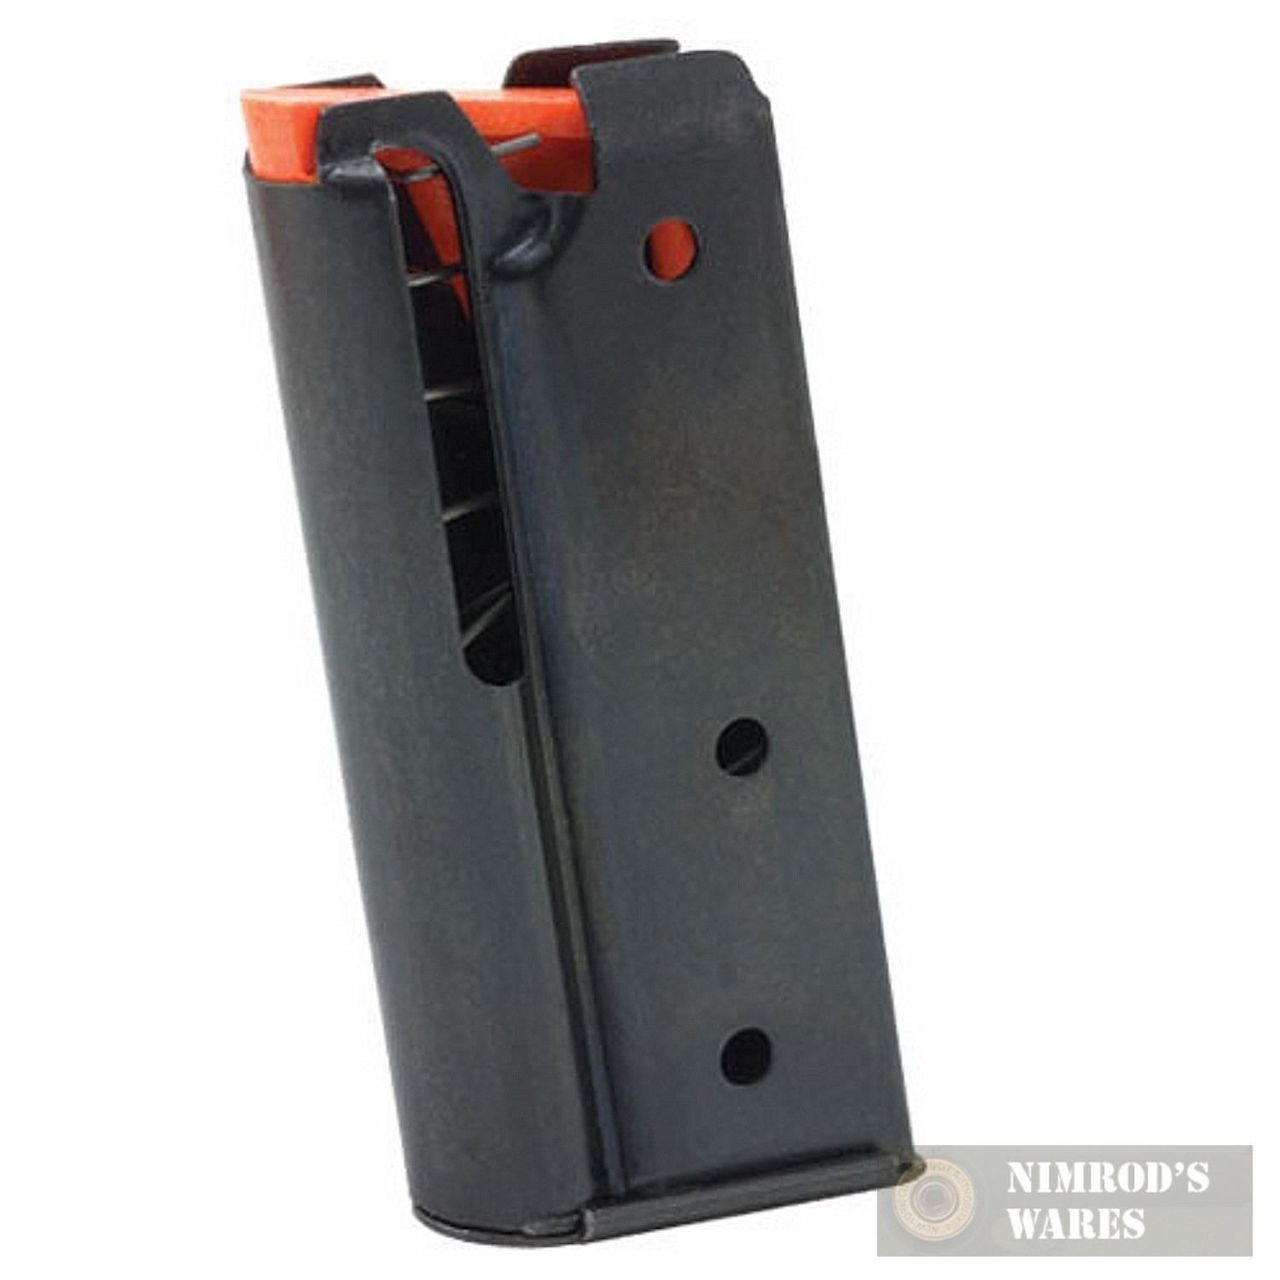 70P & MORE -NEW 71900 .22LR 7 ROUNDS Mag 25N MARLIN FACTORY MAGAZINE 70 